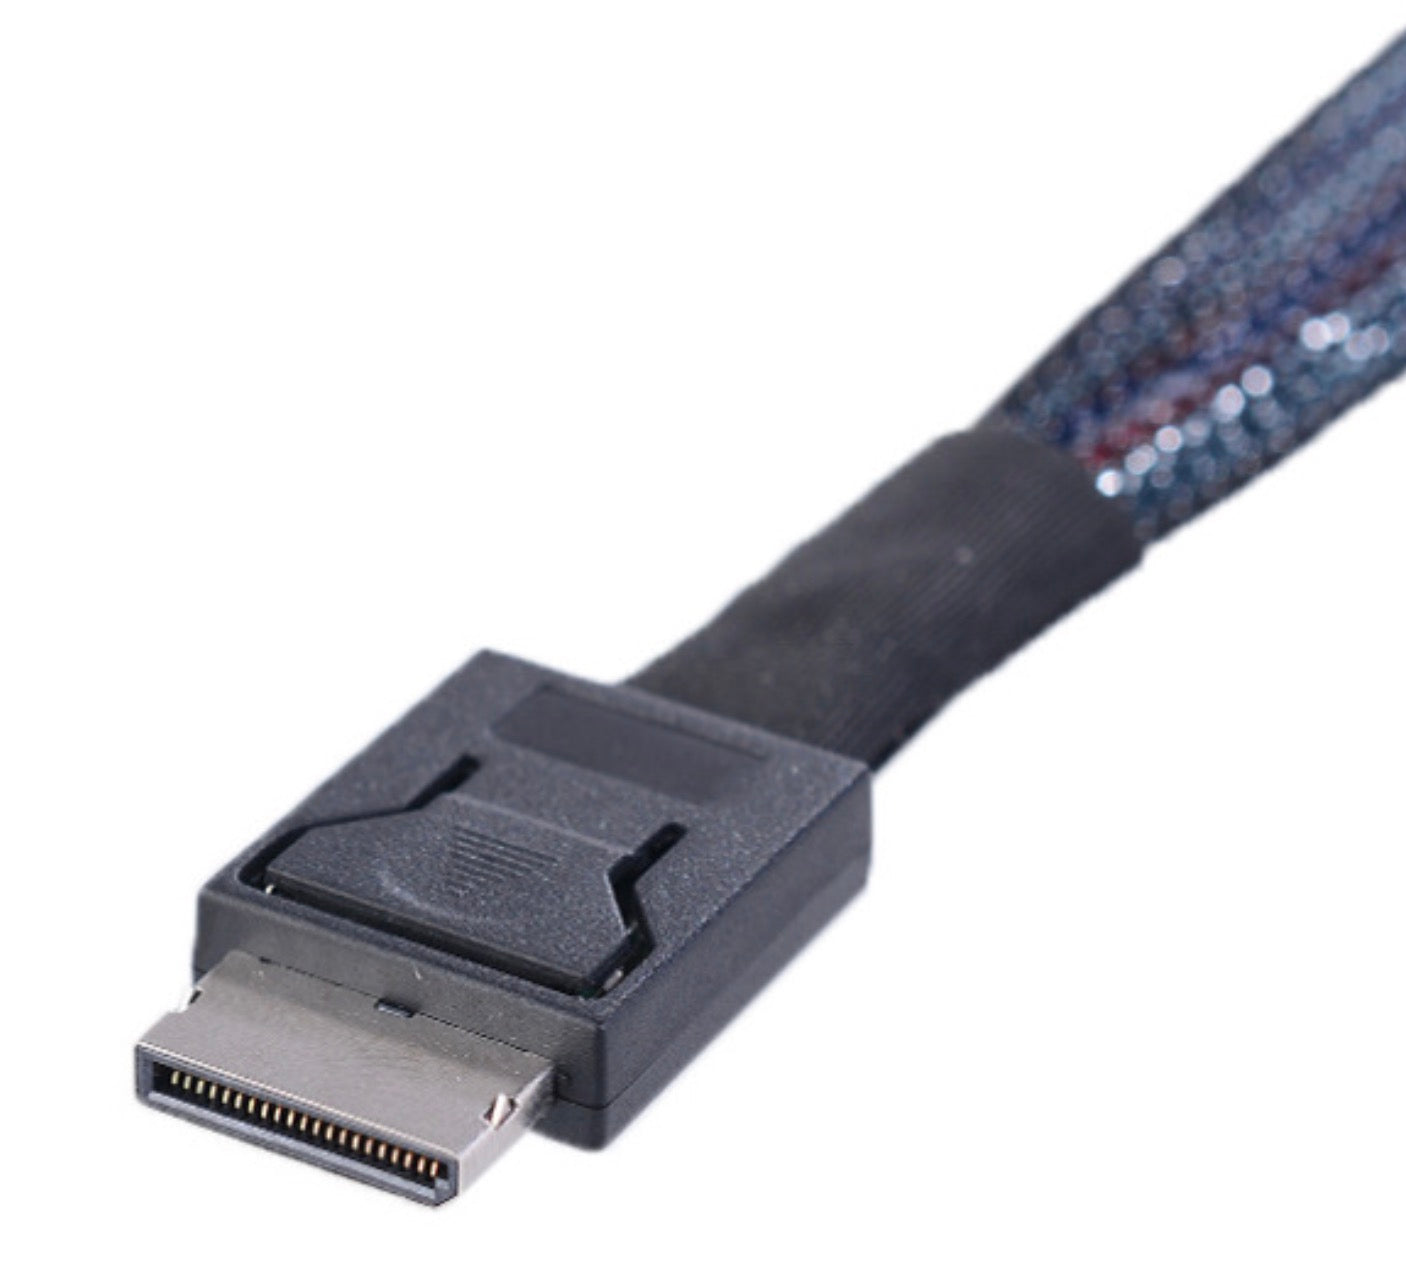 OCuLink PCIe SFF-8611 4i to OCuLink SFF-8611 SSD Data Active Cable 0.8m